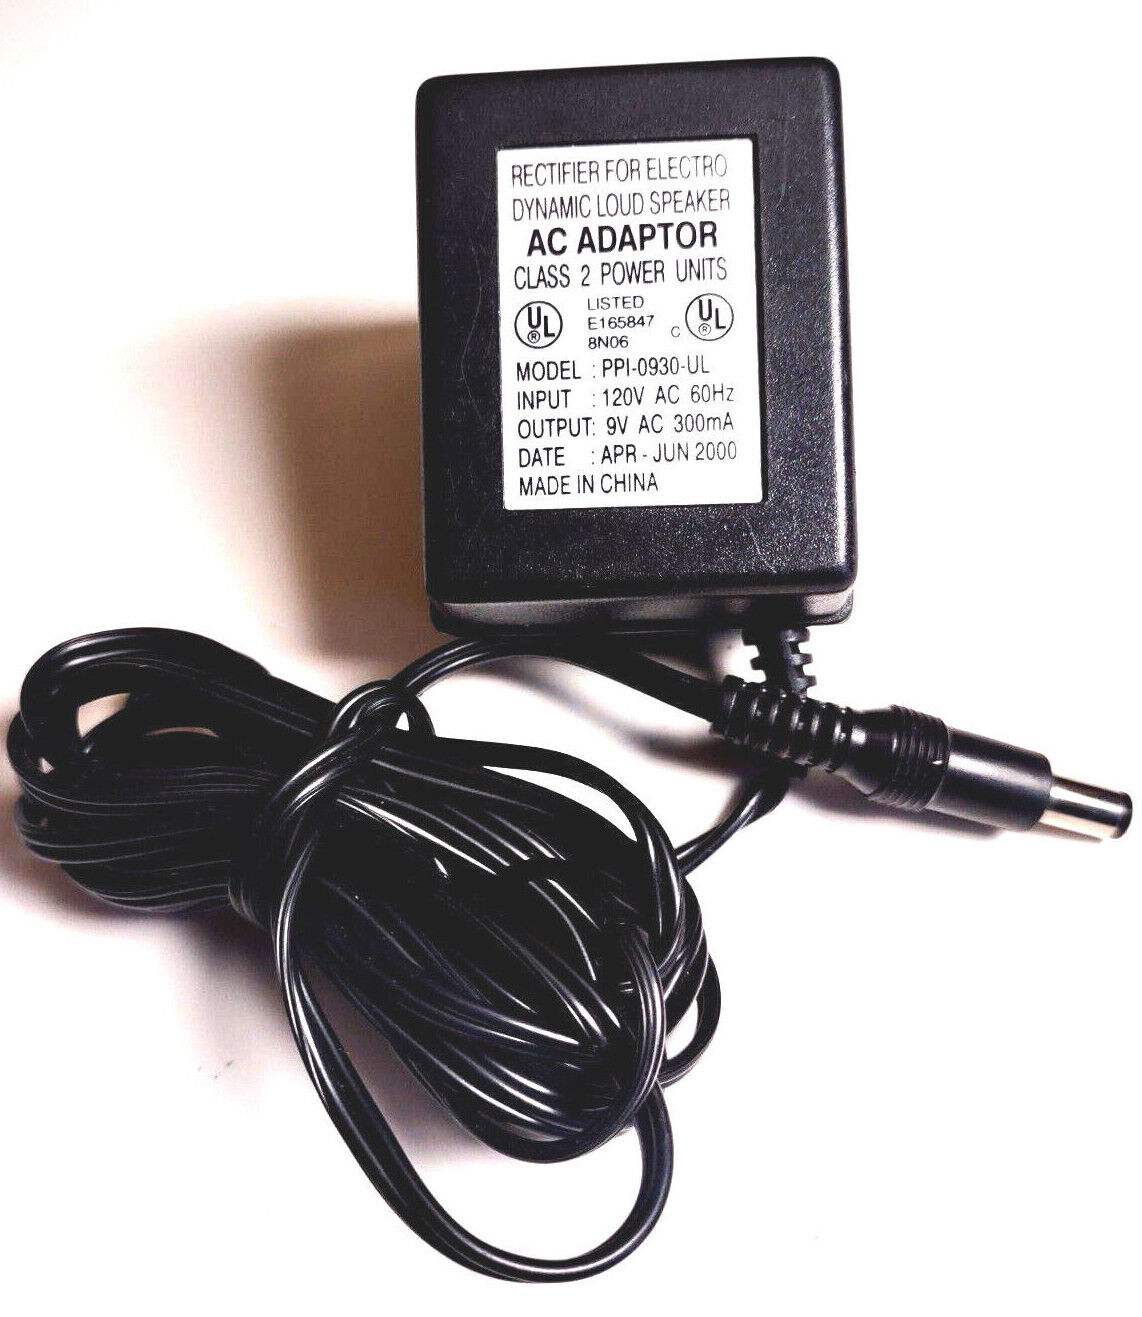 Loud Speaker 9V 300mA Class 2 Power Supply AC/DC Adapter M PPI-0930UL RECTIFIER Compatible Brand: Universal Brand: 2